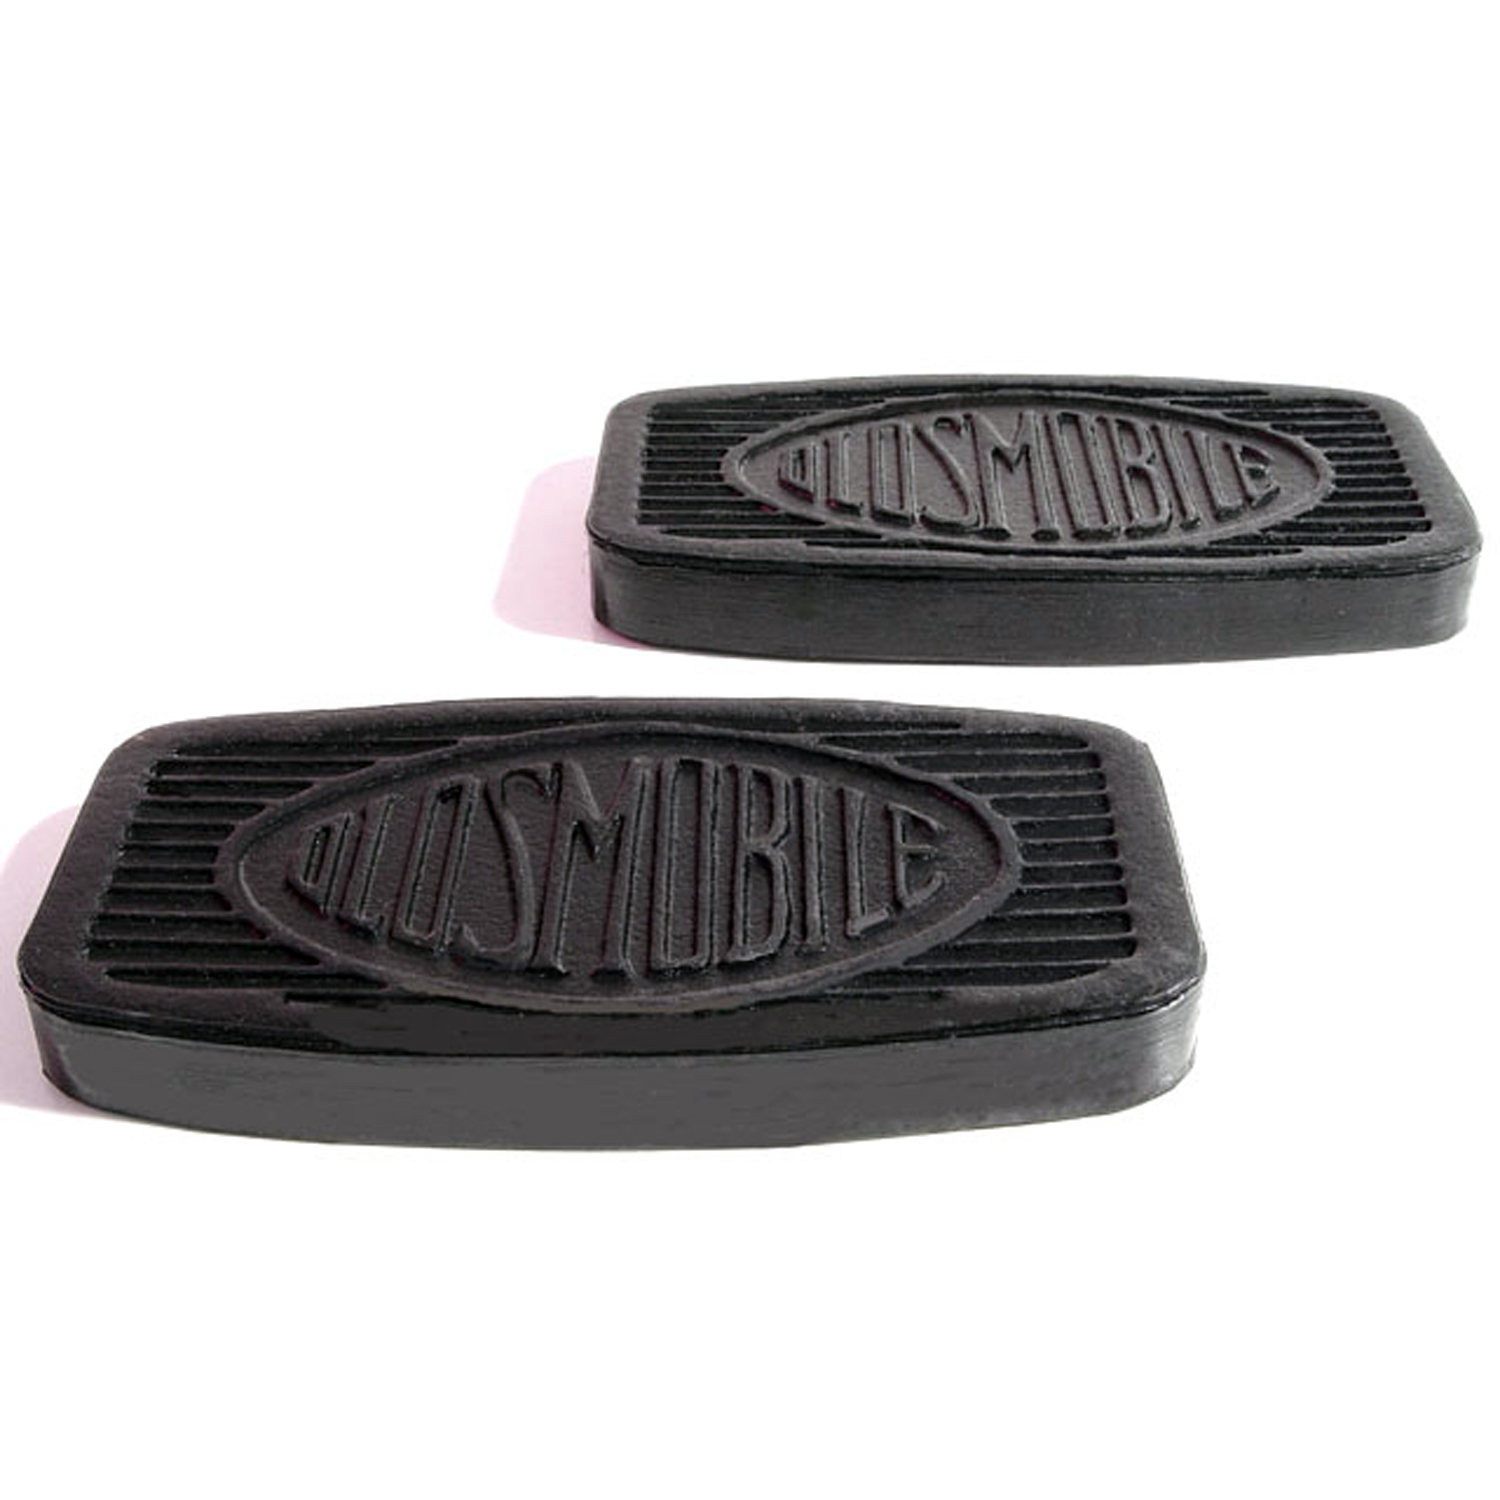 1931 Oldsmobile Model F-31 Clutch and Brake Pedal Pads.  3-1/2 wide X 1-3/16 long-CB 95